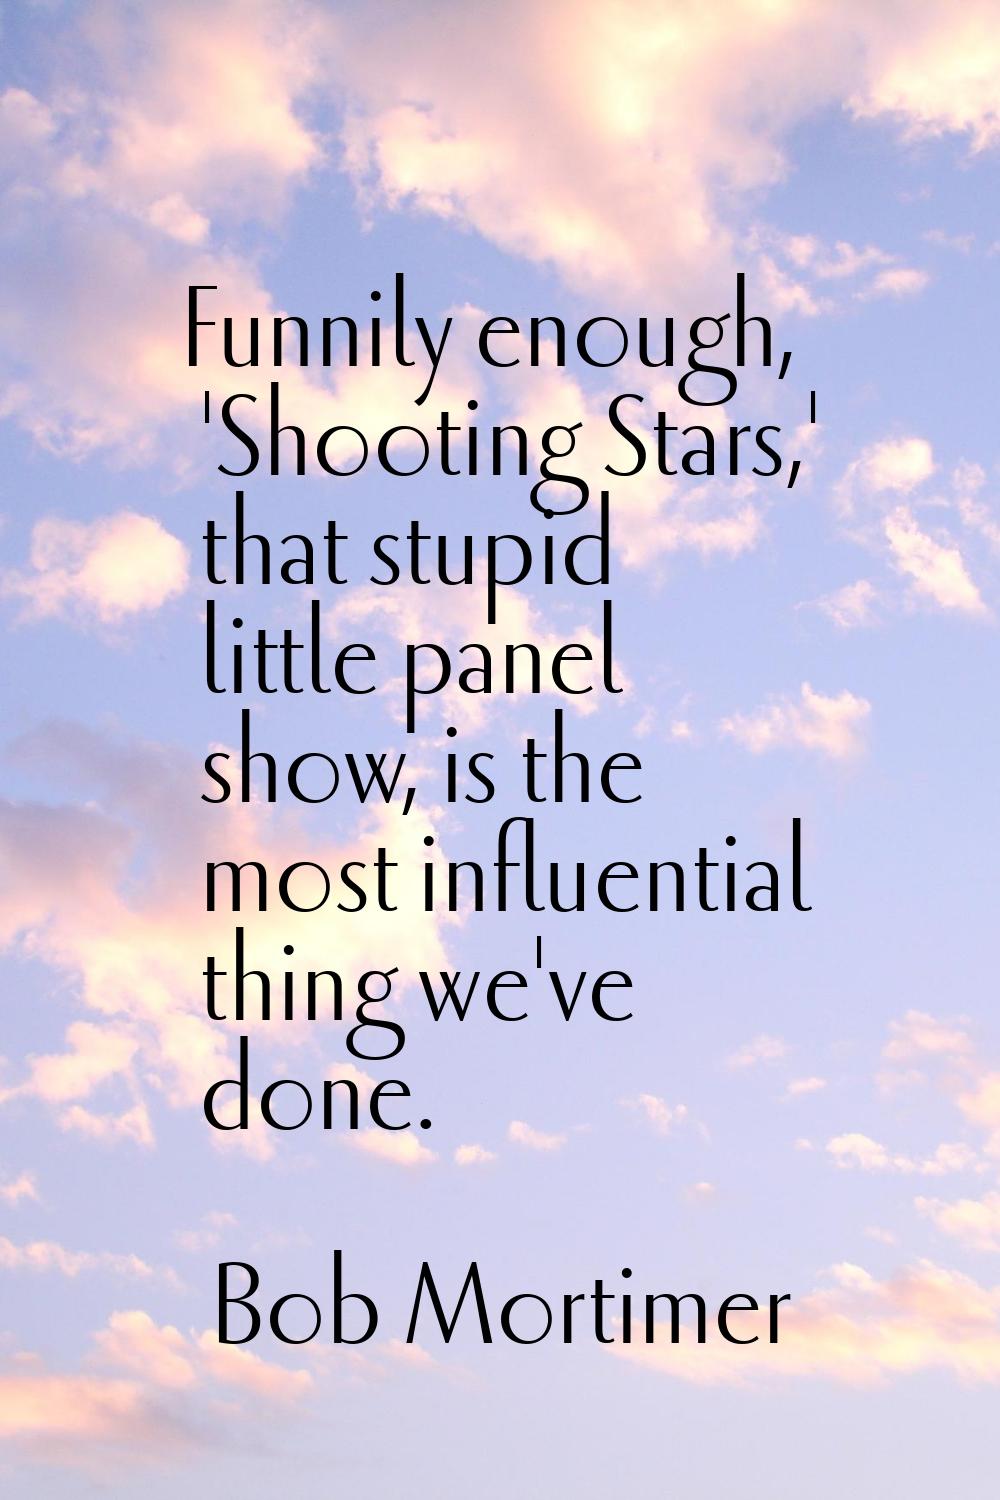 Funnily enough, 'Shooting Stars,' that stupid little panel show, is the most influential thing we'v